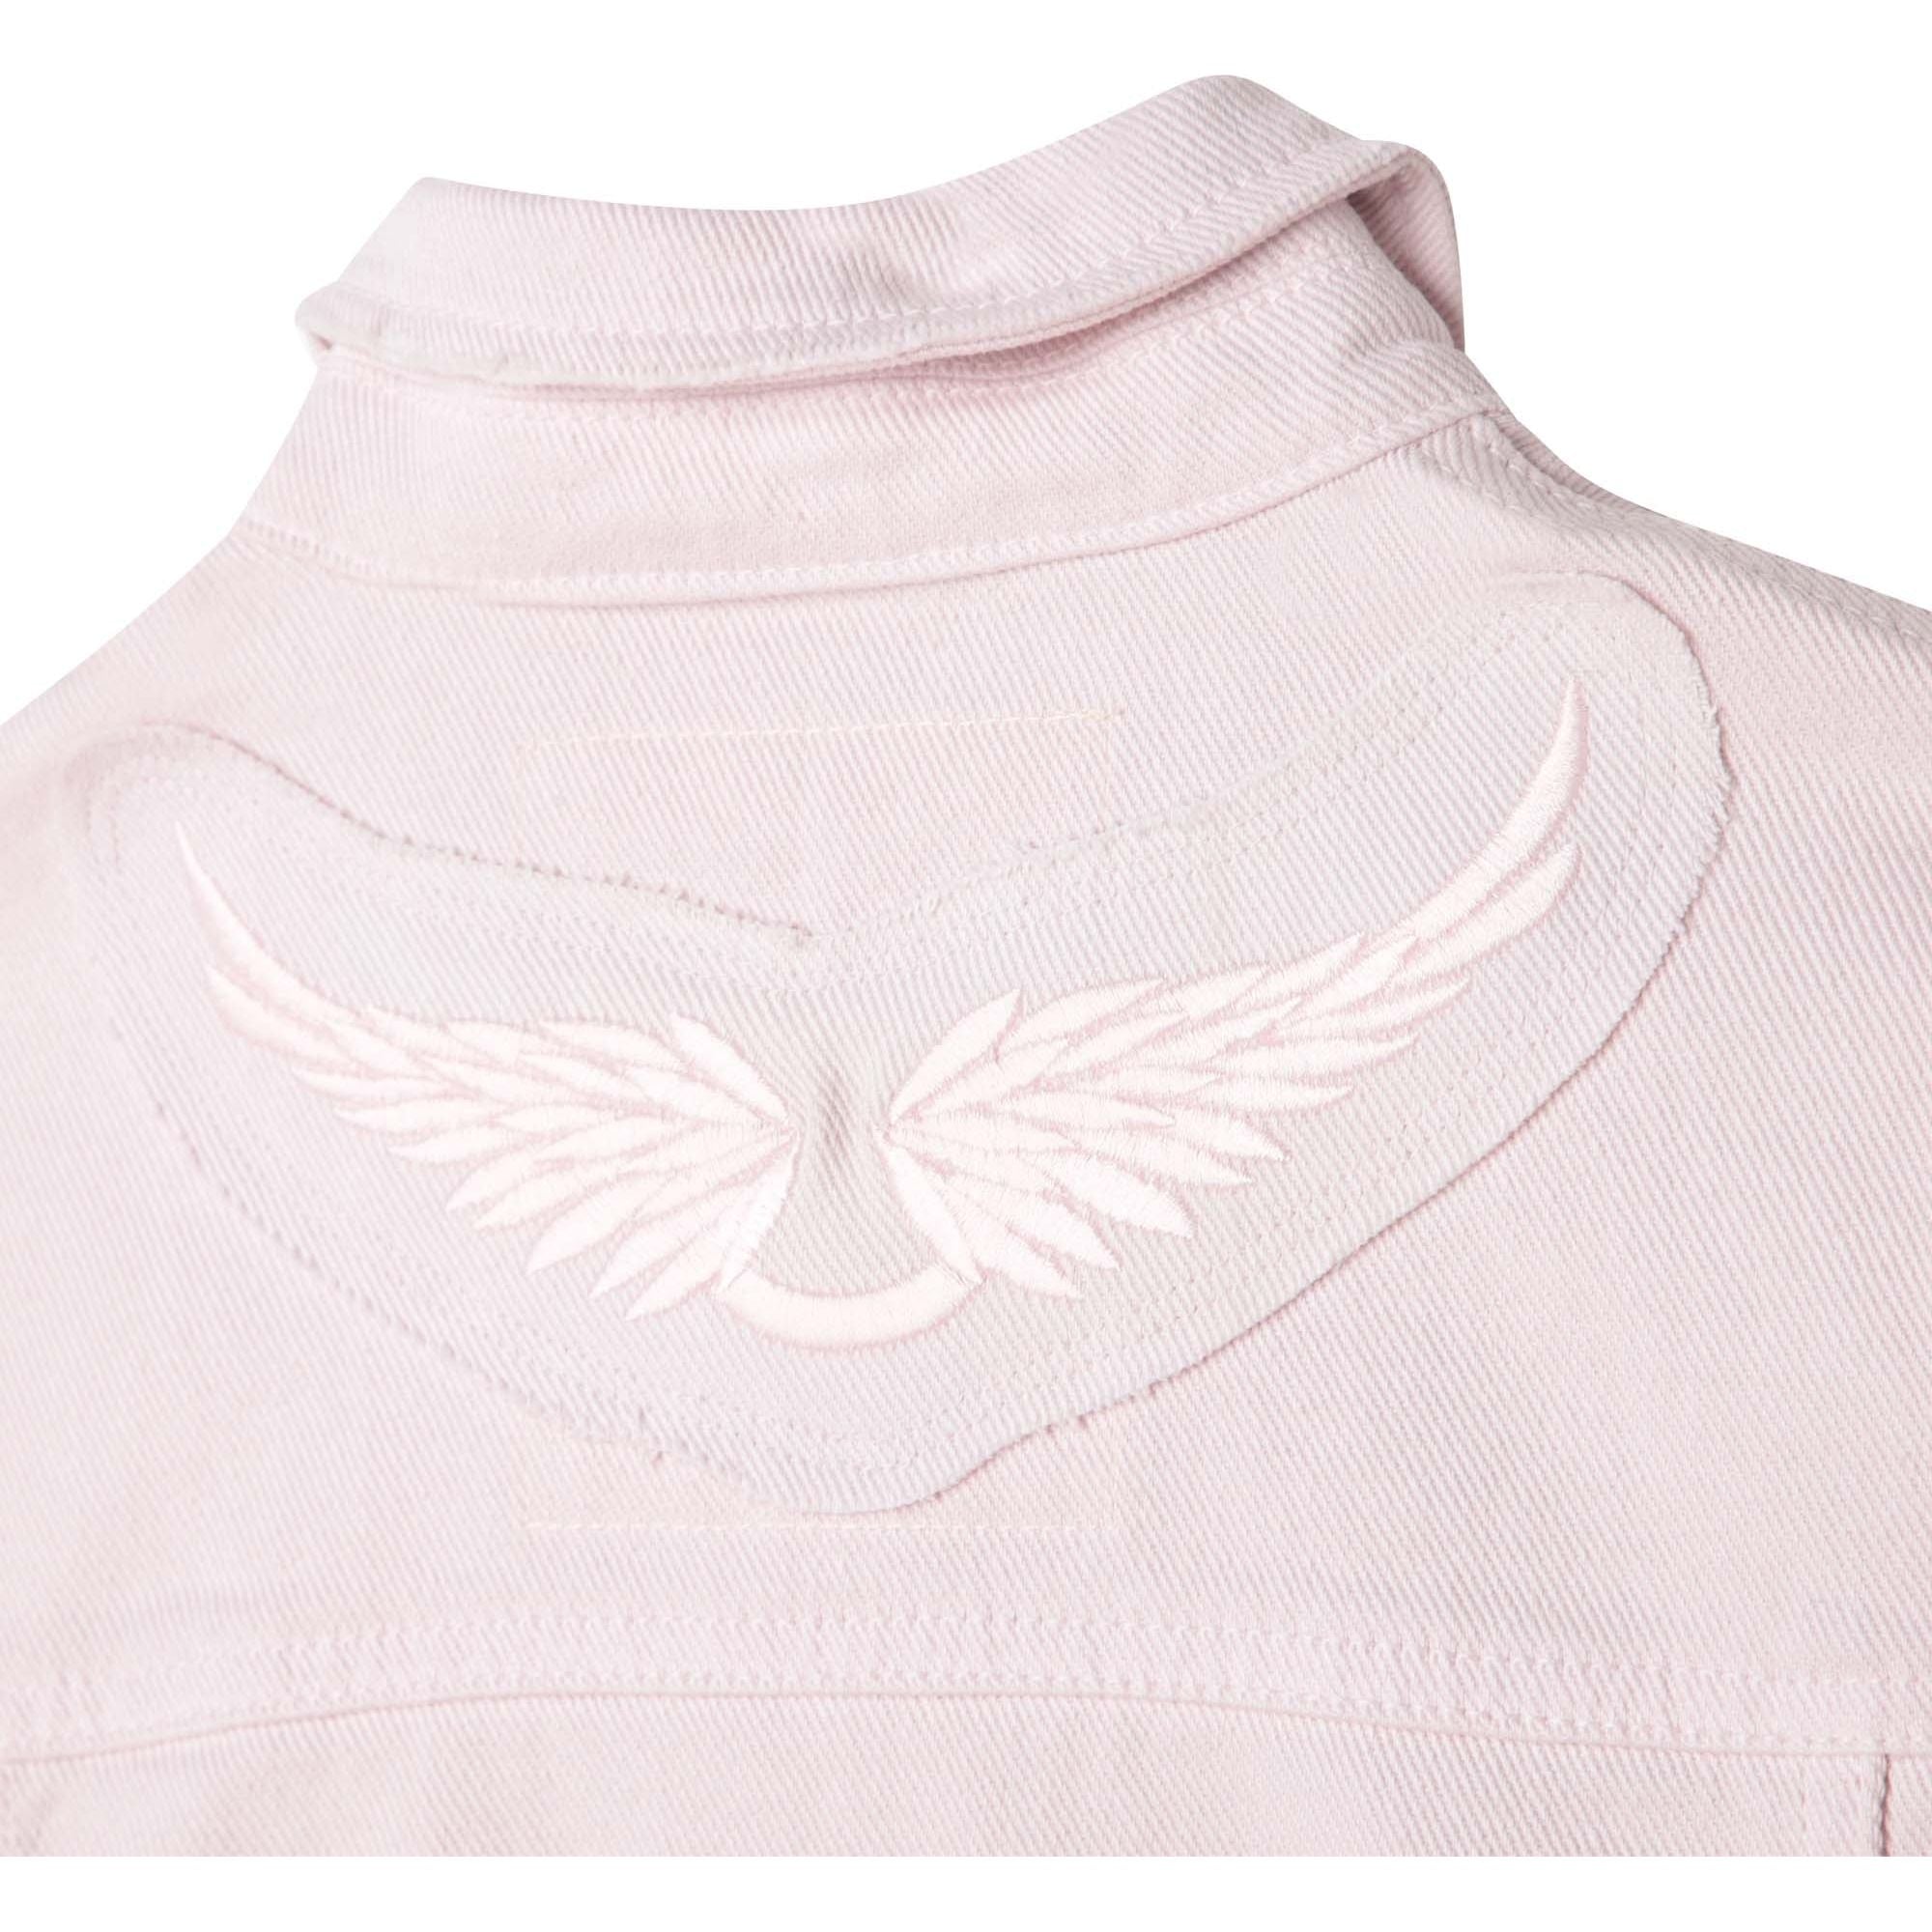 EMBROIDERED WINGS DENIM JACKET